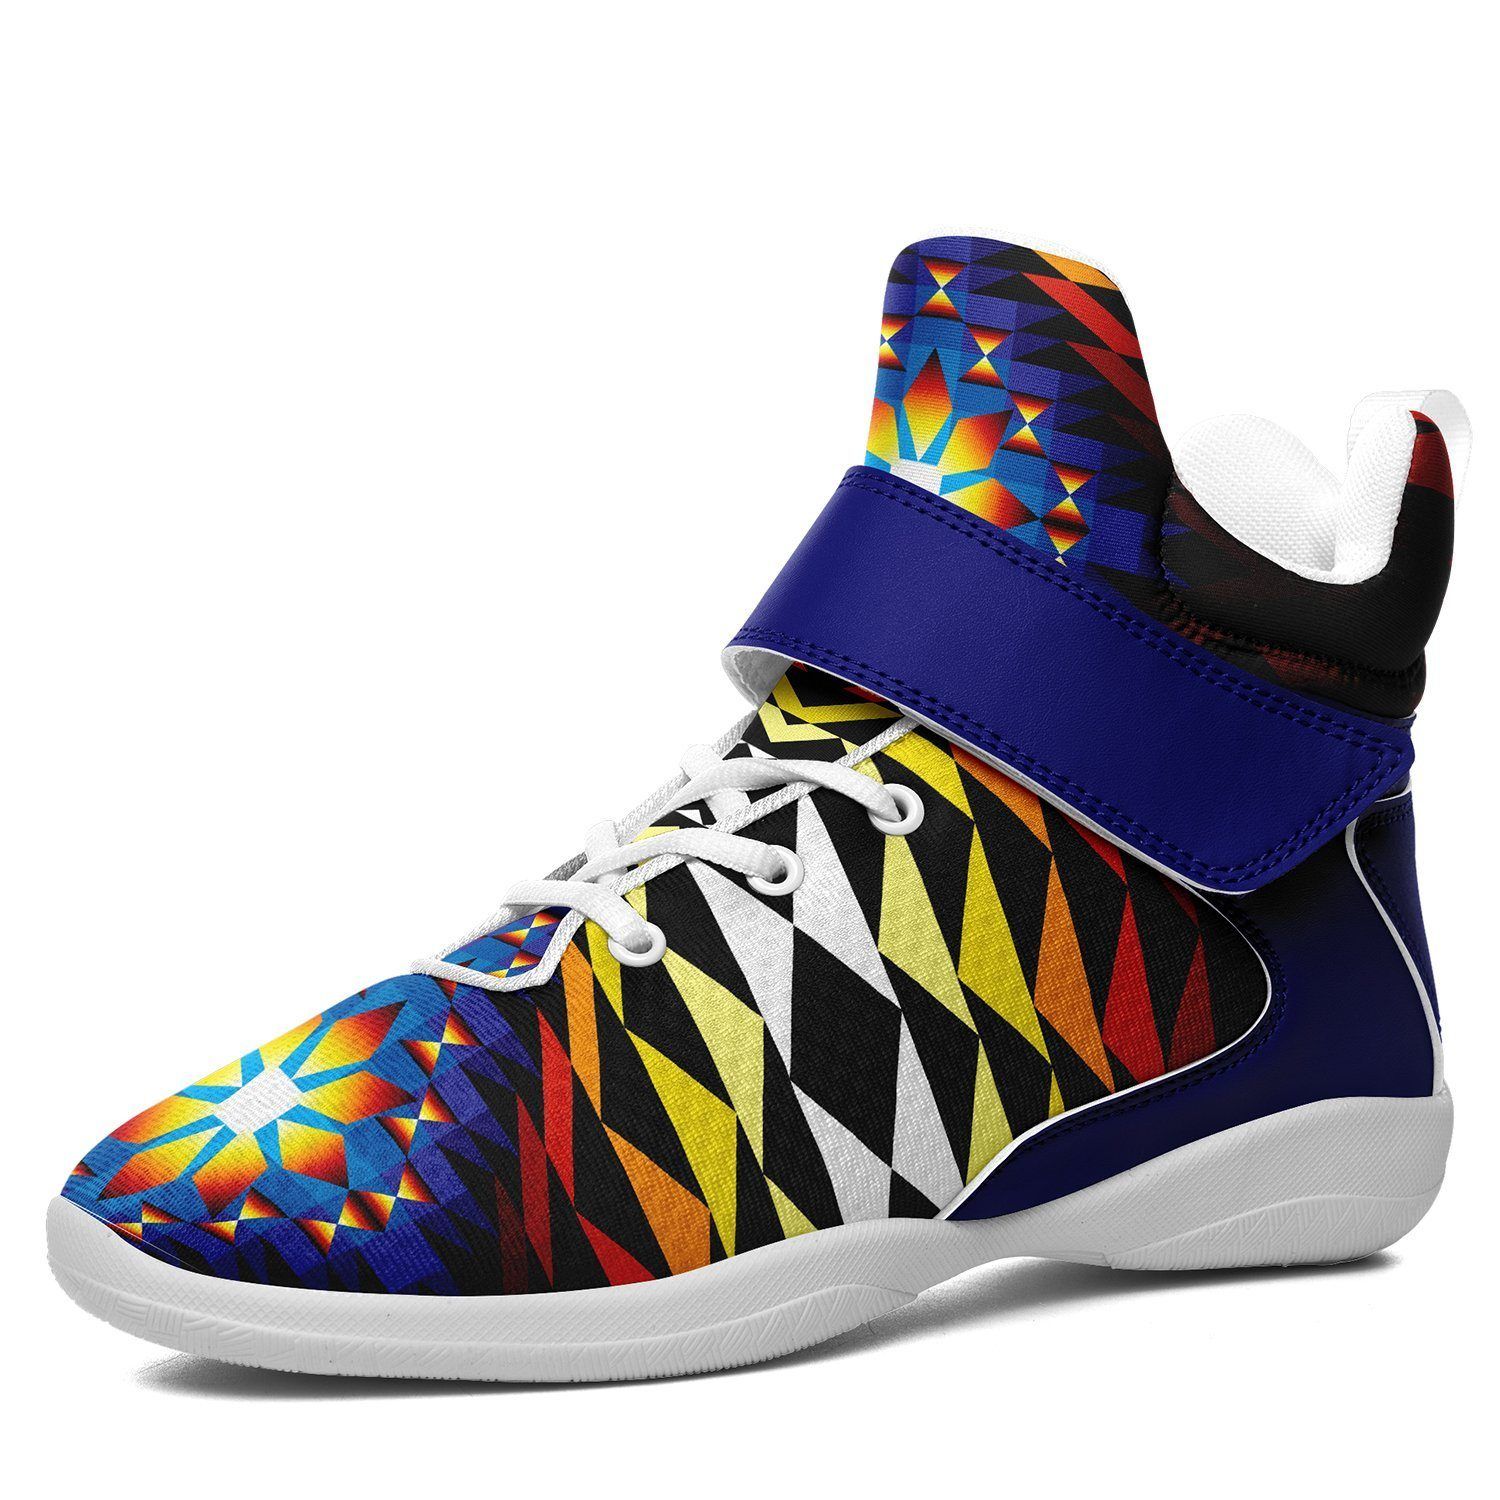 Sunset Blanket Ipottaa Basketball / Sport High Top Shoes - White Sole 49 Dzine US Men 7 / EUR 40 White Sole with Blue Strap 